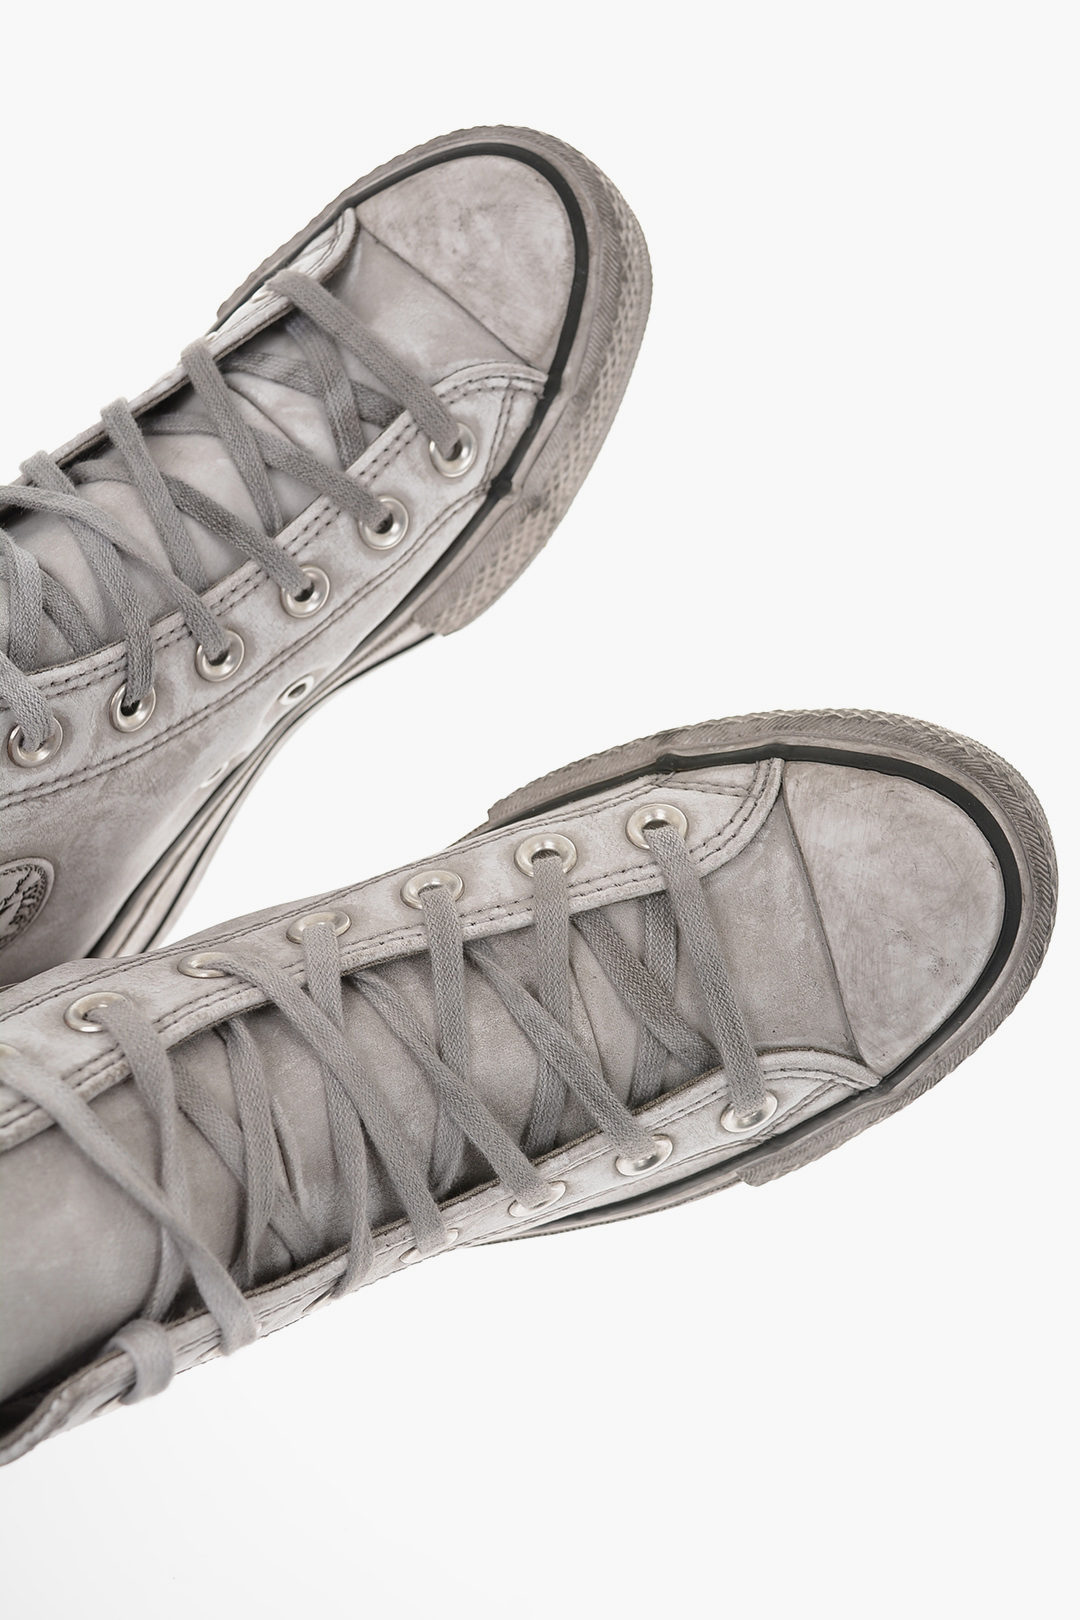 Converse CHUCK TAYLOR ALL STAR High-top Sneakers in pelle Effetto ... قهوة كوستاريكا